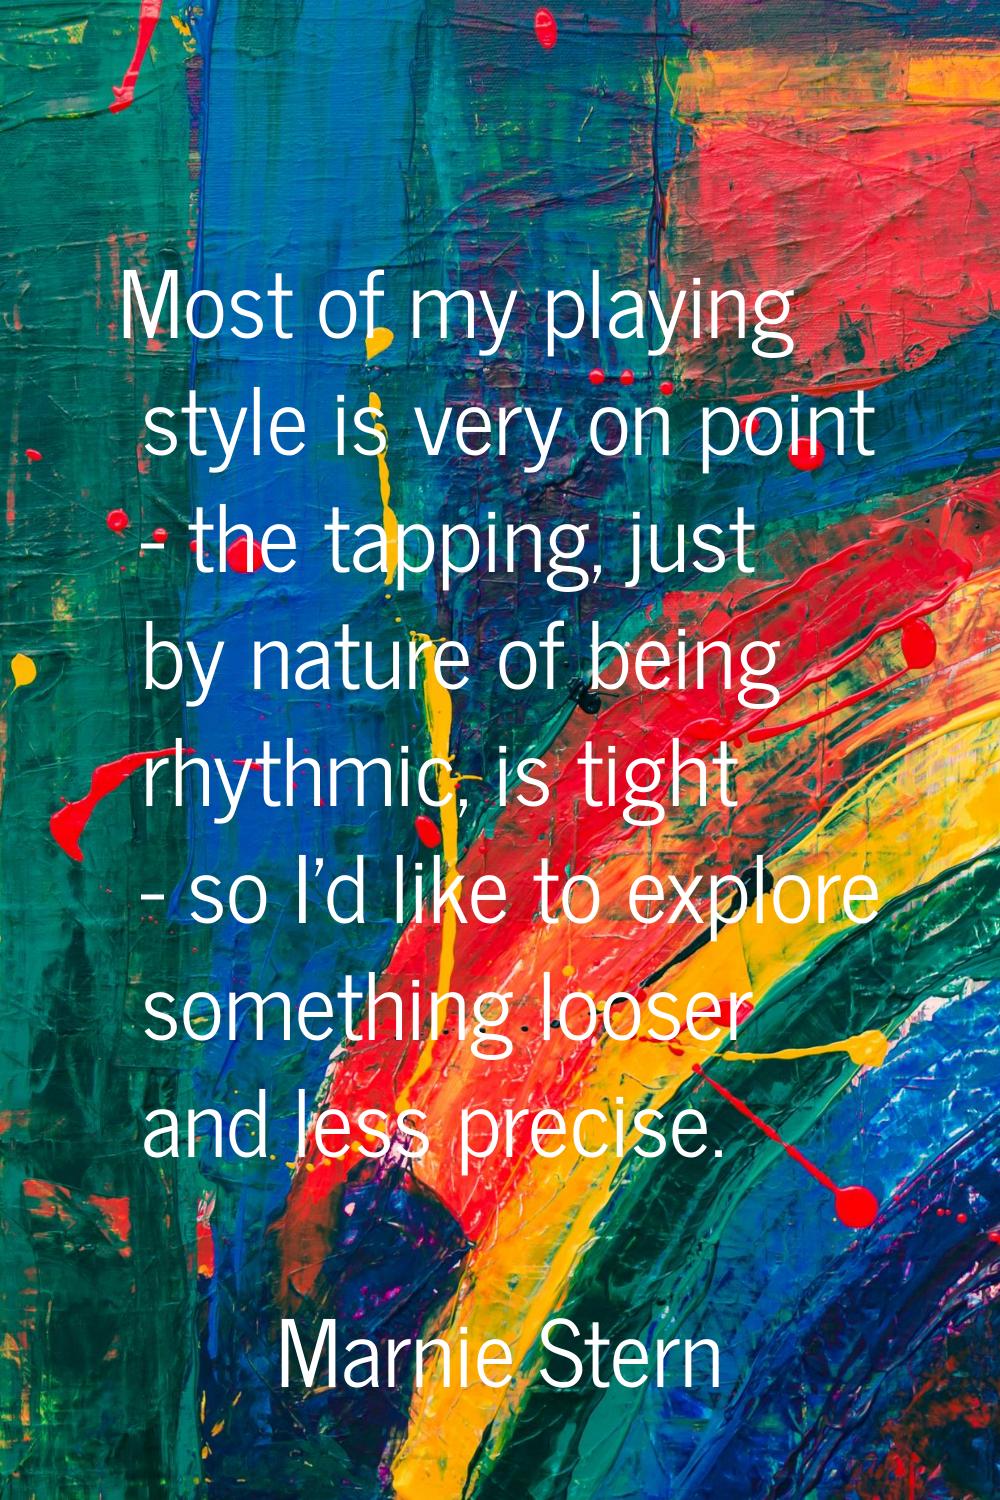 Most of my playing style is very on point - the tapping, just by nature of being rhythmic, is tight